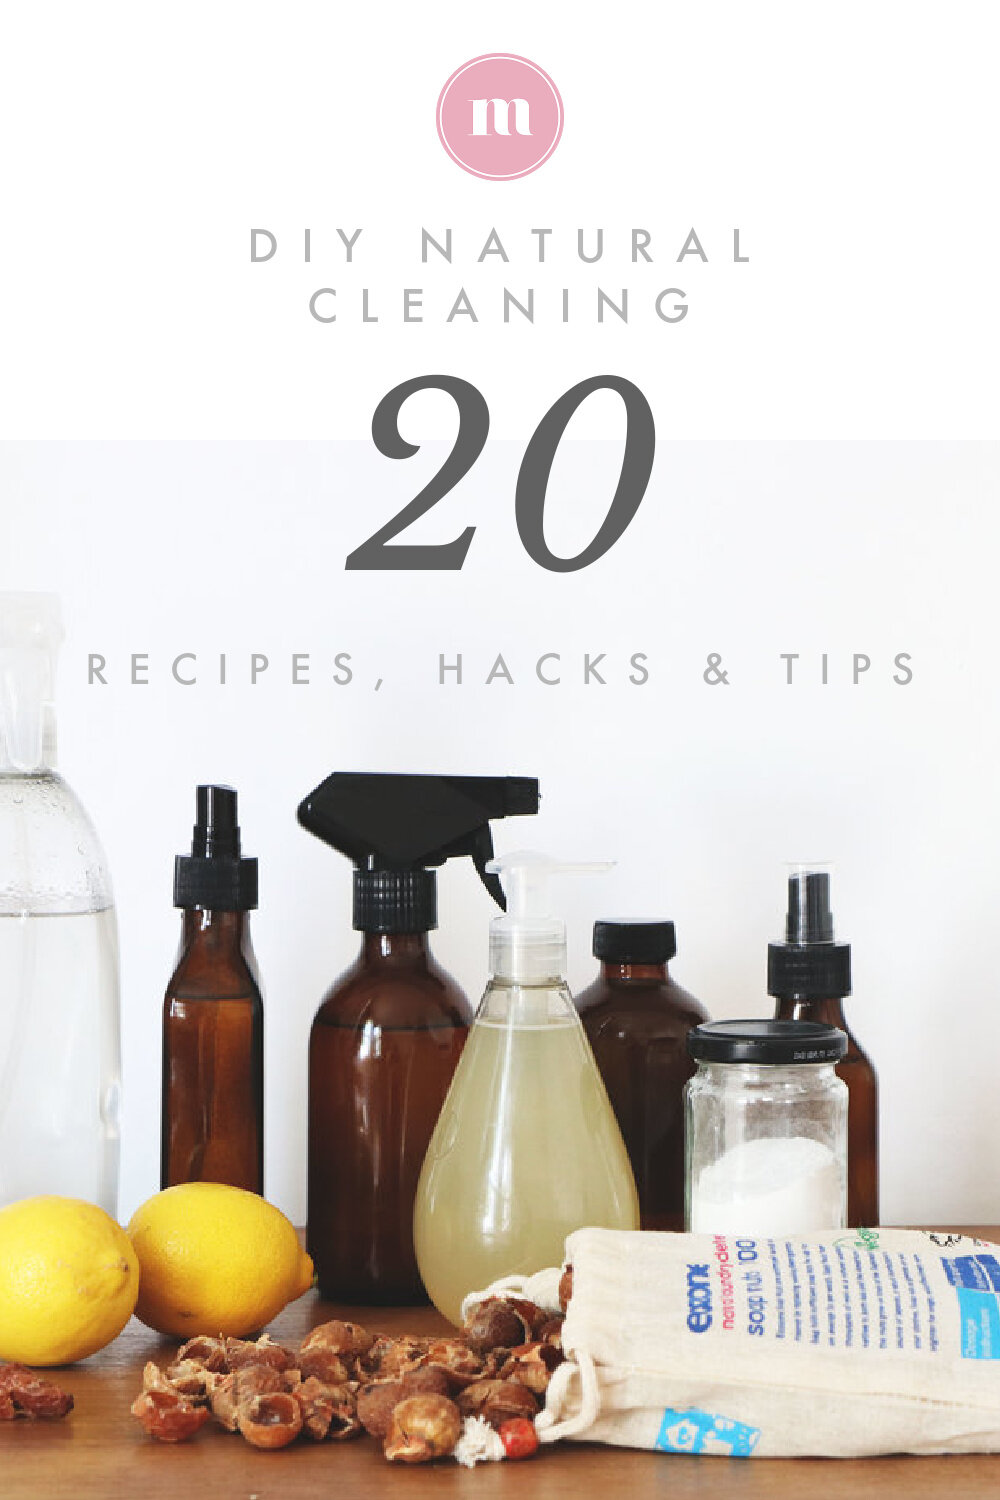 5 easy ways to use Soap Berries and Essential Oils for toxin free cleaning  - Go For Zero